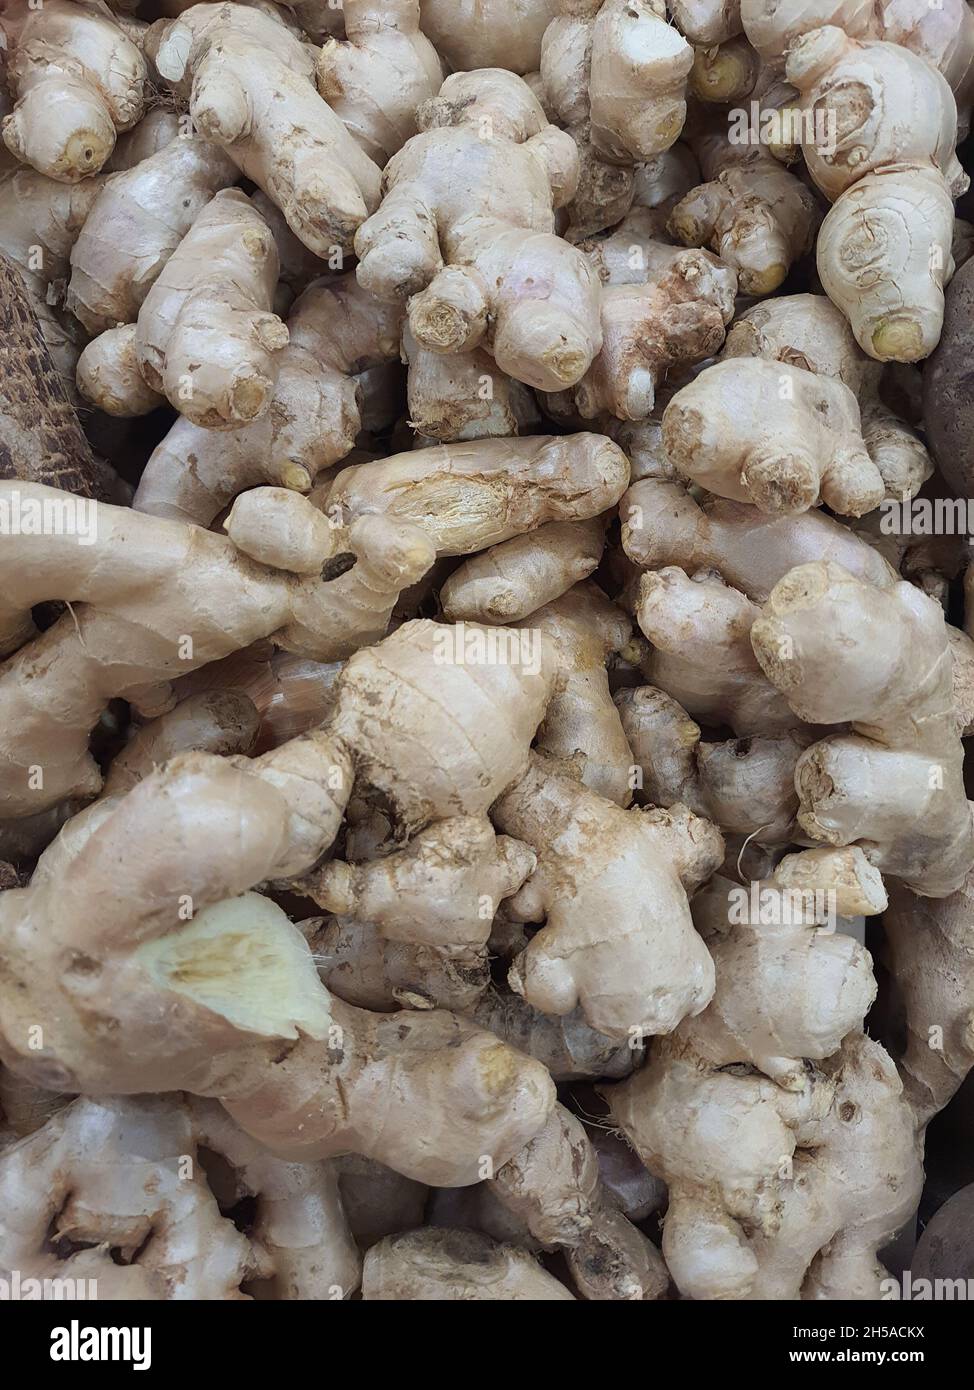 Gingers (Zingiber officinale) in a market. Stock Photo